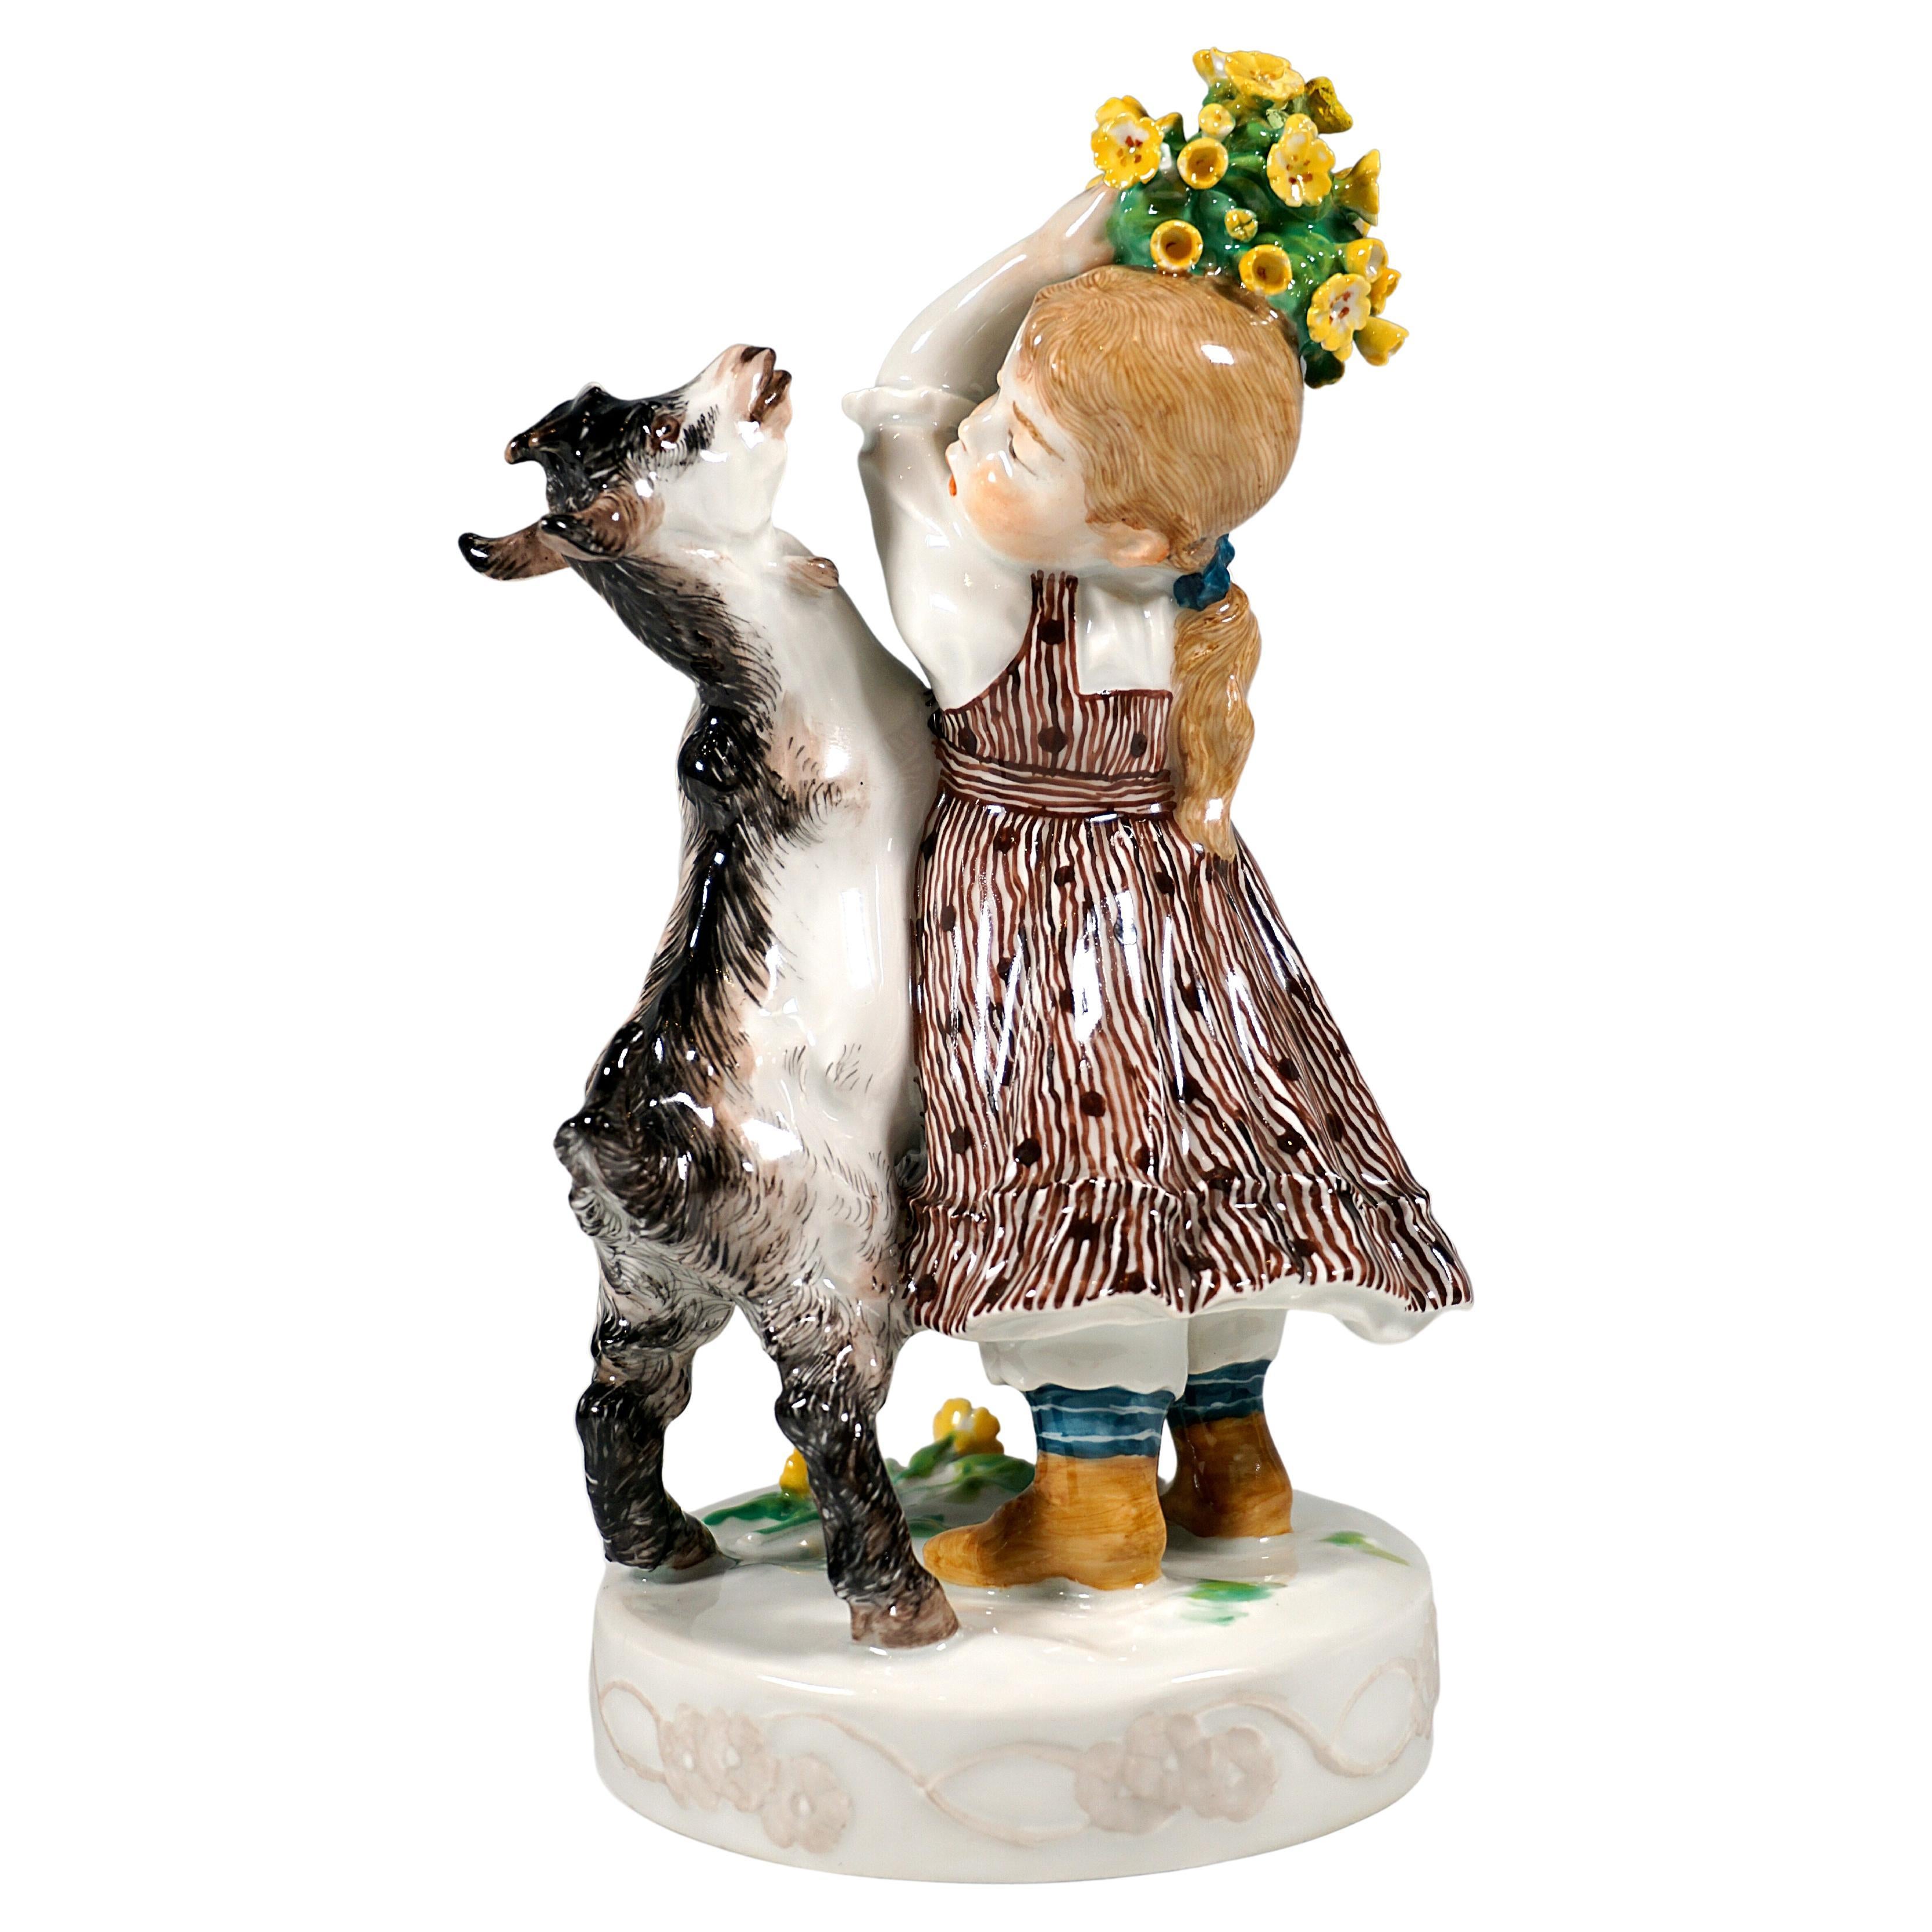 Art Nouveau Group 'Girl With Goat', by Erich Hoesel, Meissen Germany, ca 1910 For Sale